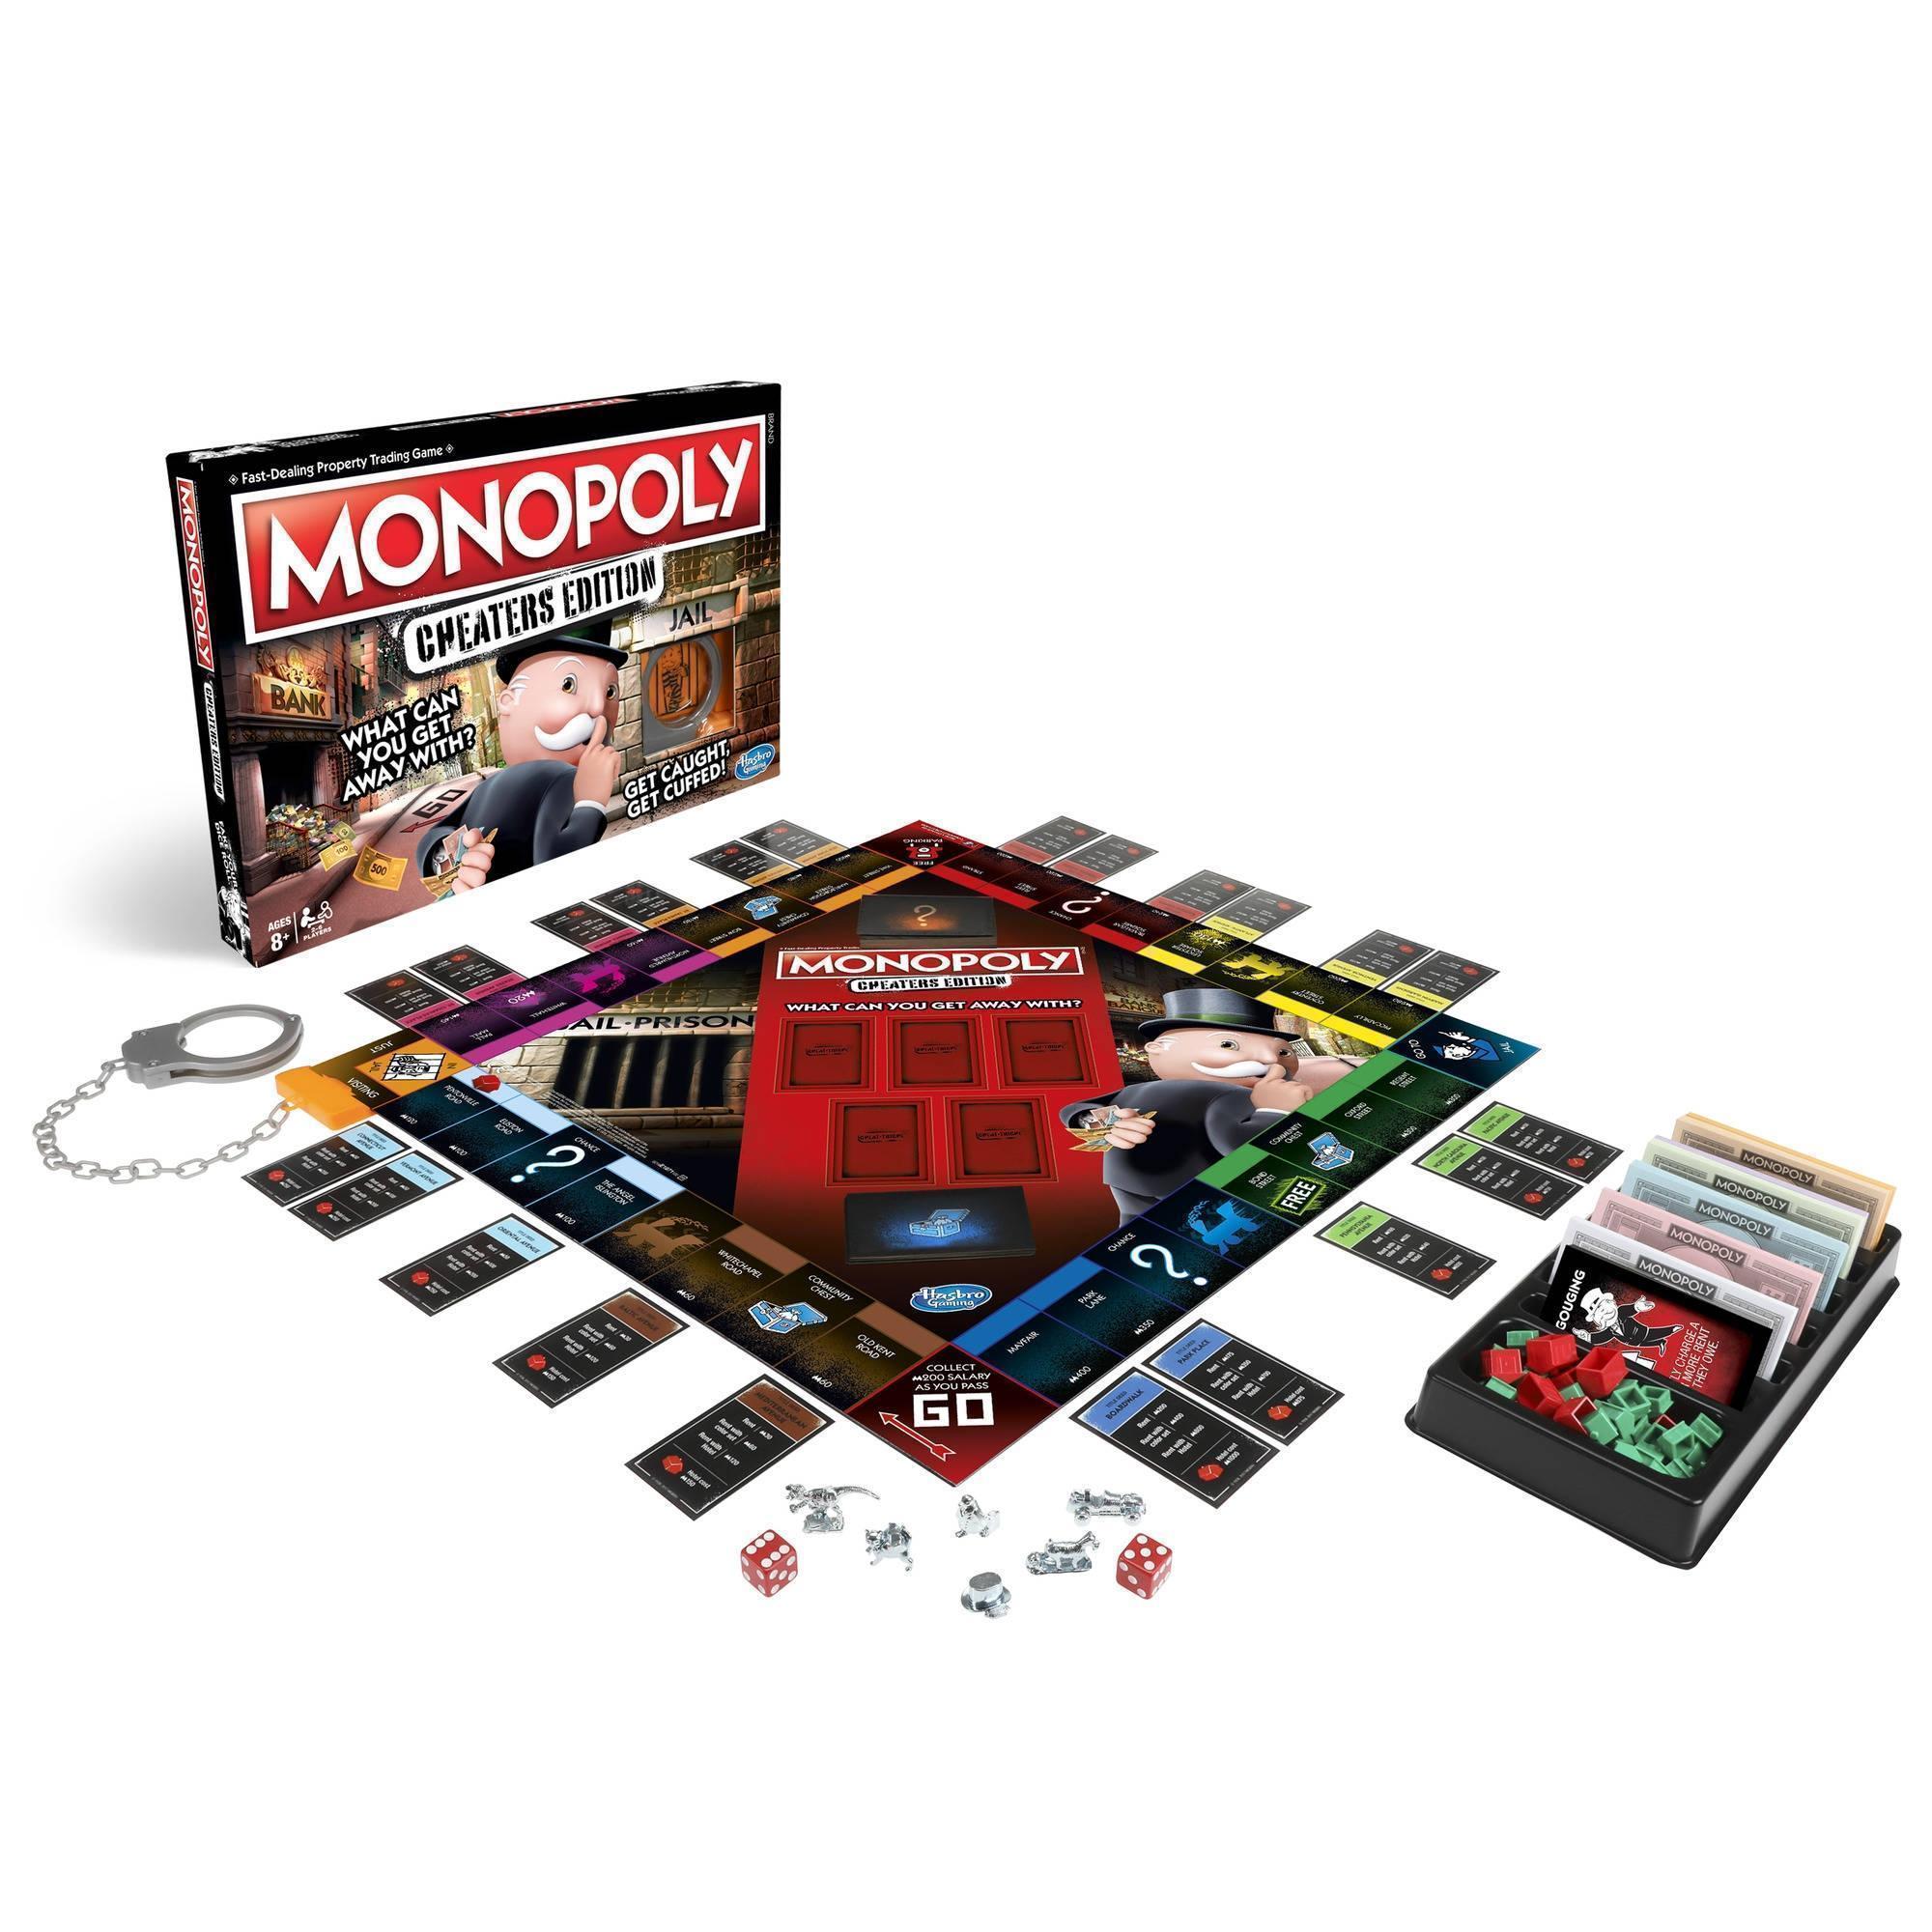 Cheaters Edition Monopoly The Fast Dealing Property Trading Board Game